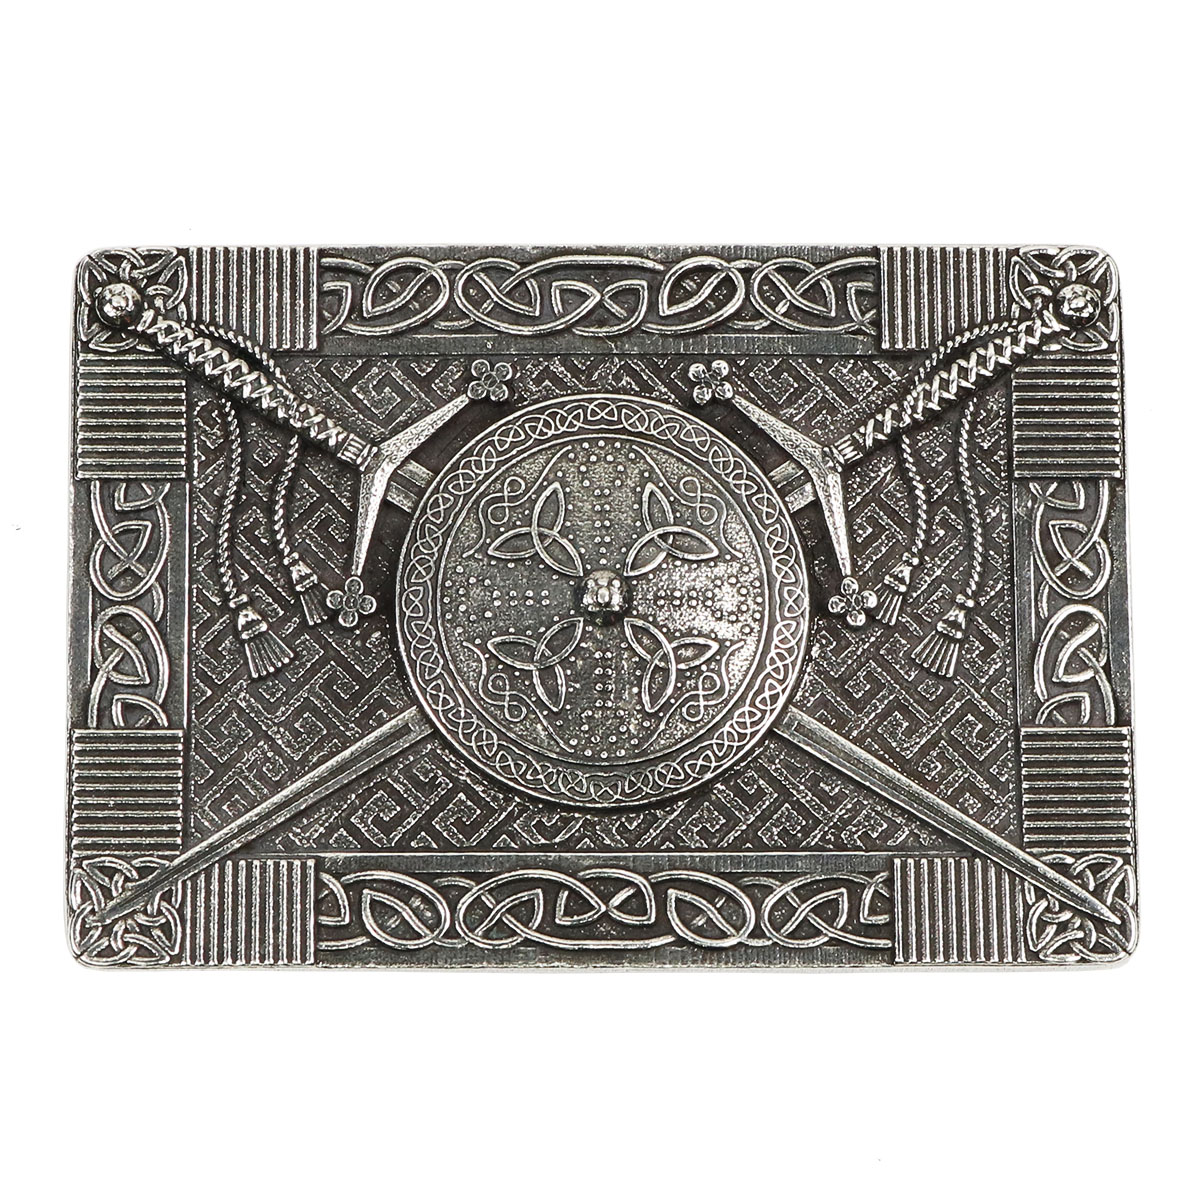 A Claymore and Targe Kilt Belt Buckle with a celtic design.